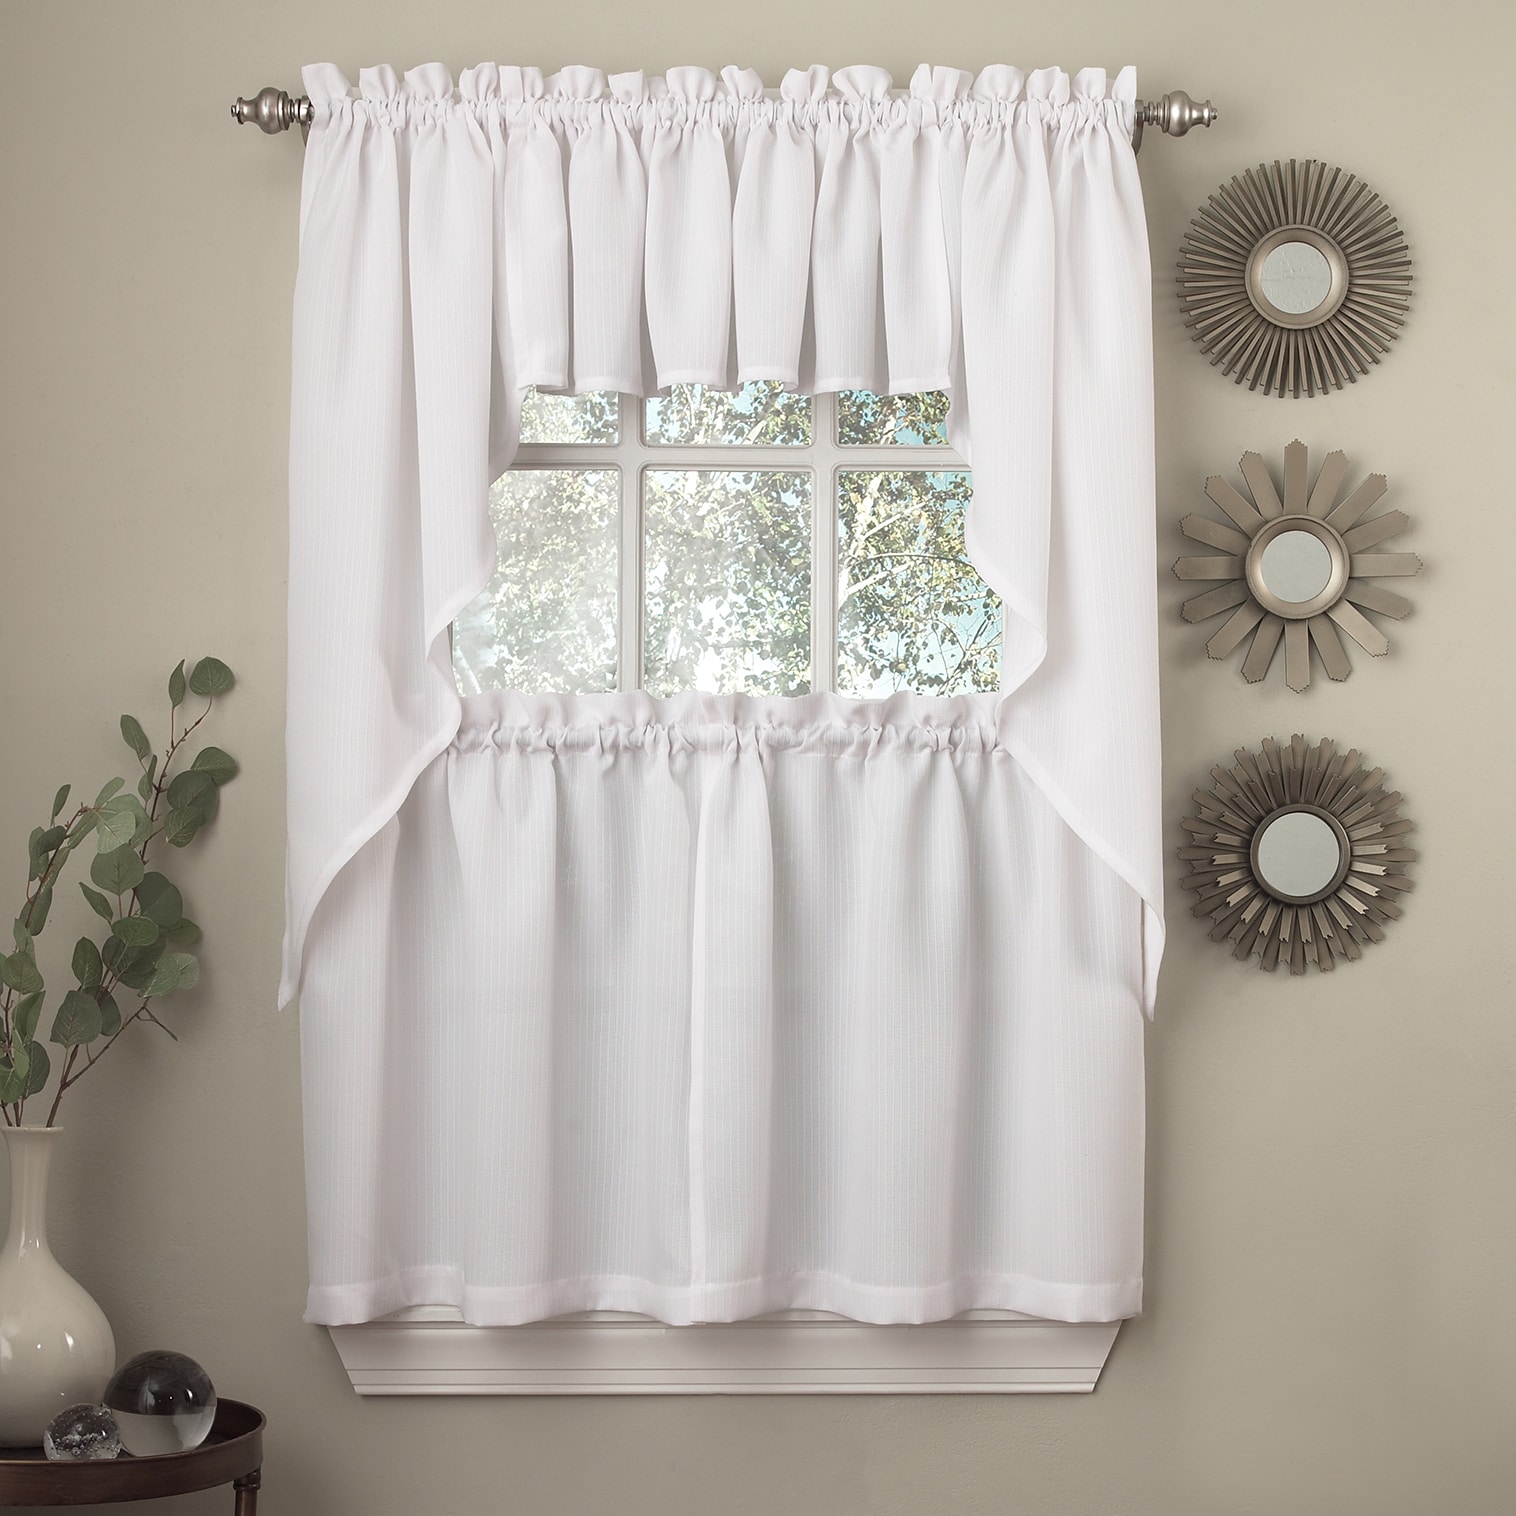 Buy Curtain Tiers Online At Overstock Our Best Window Treatments Deals